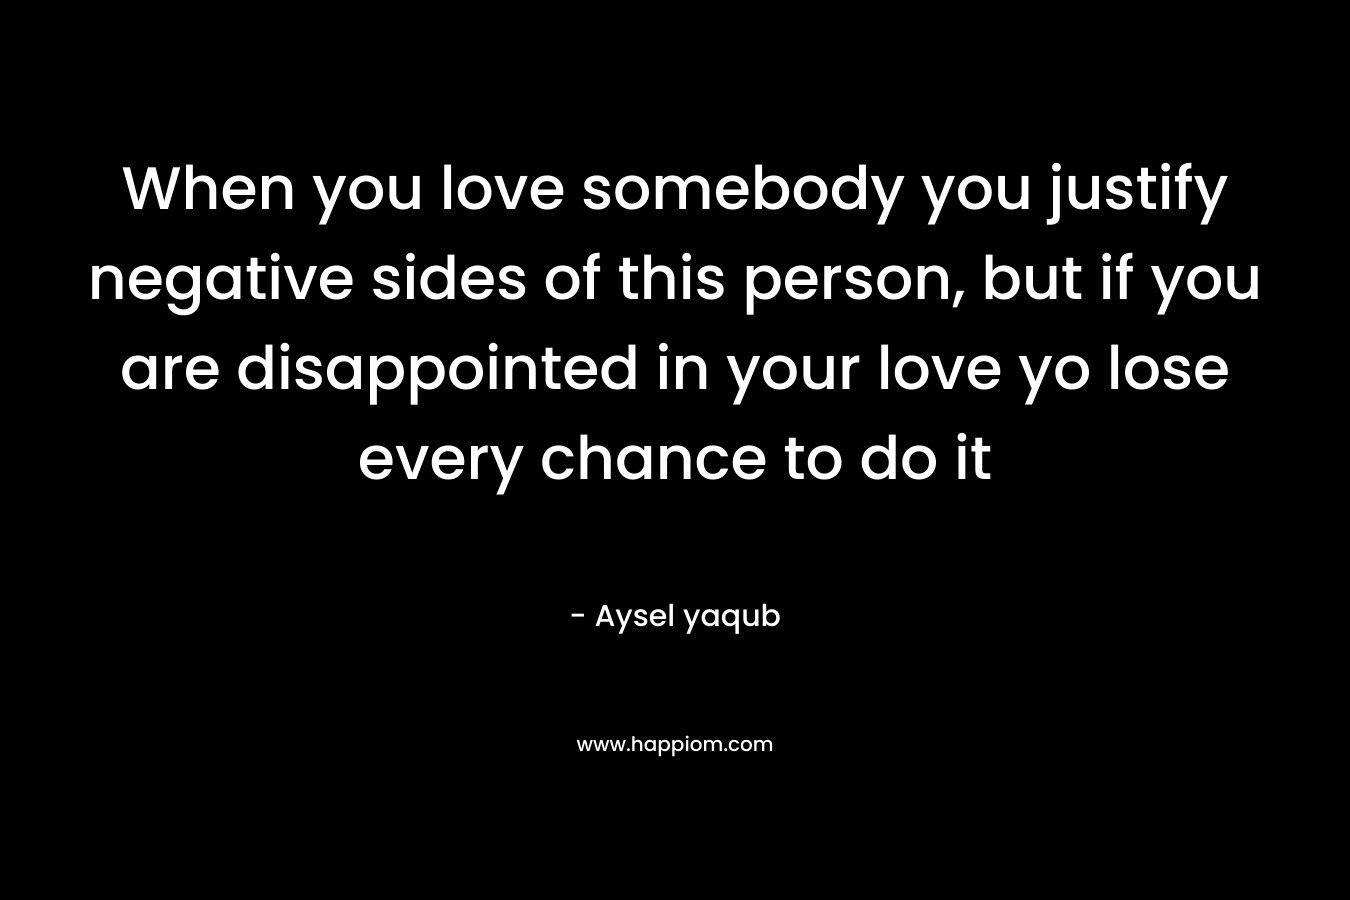 When you love somebody you justify negative sides of this person, but if you are disappointed in your love yo lose every chance to do it